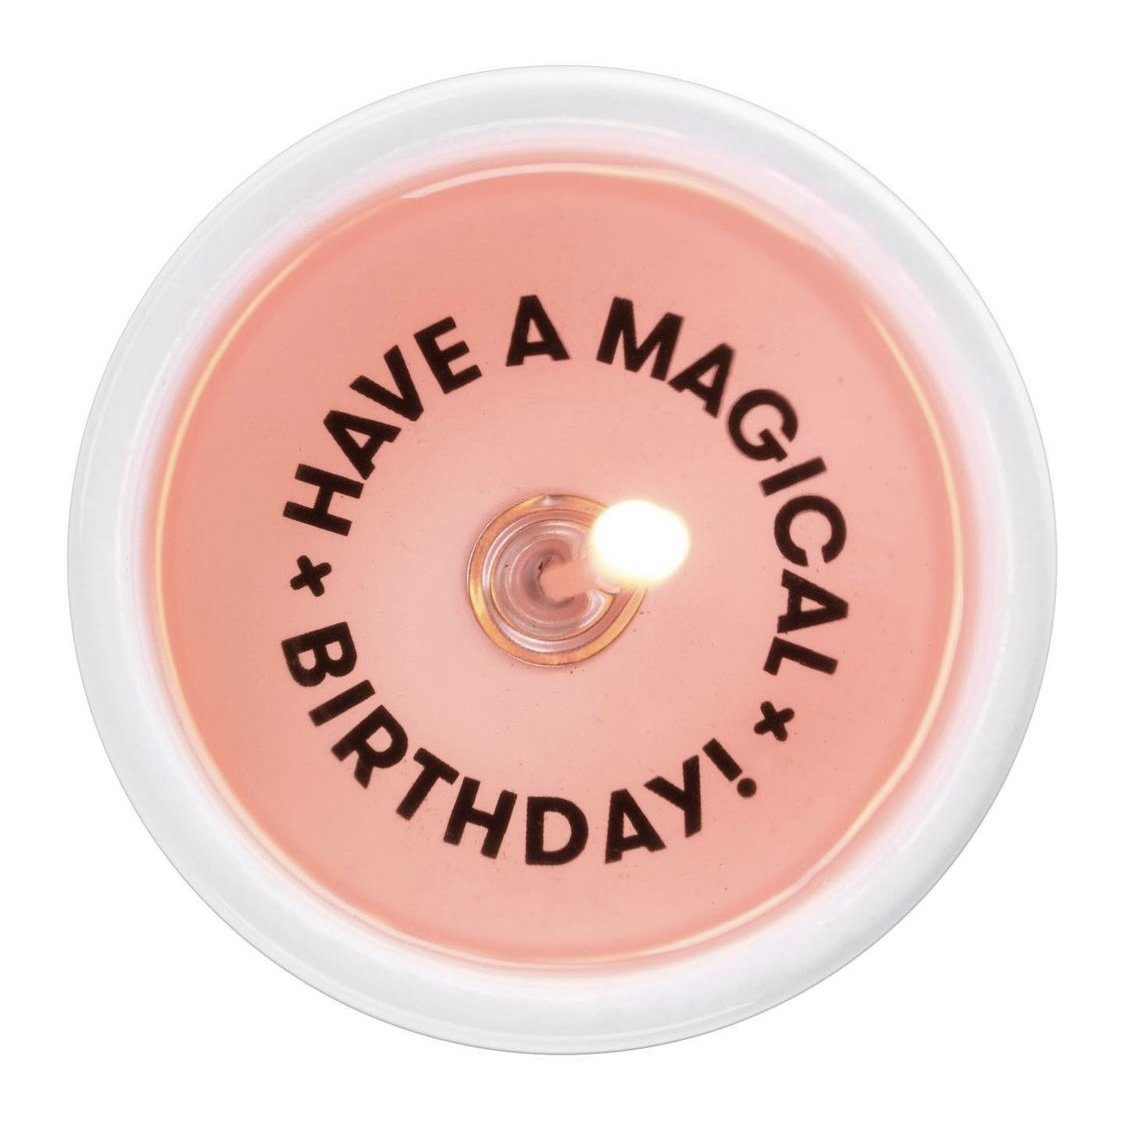 Secret Message Candle Decor Luke Adams Glass Blowing Studio Have a Magical Birthday 